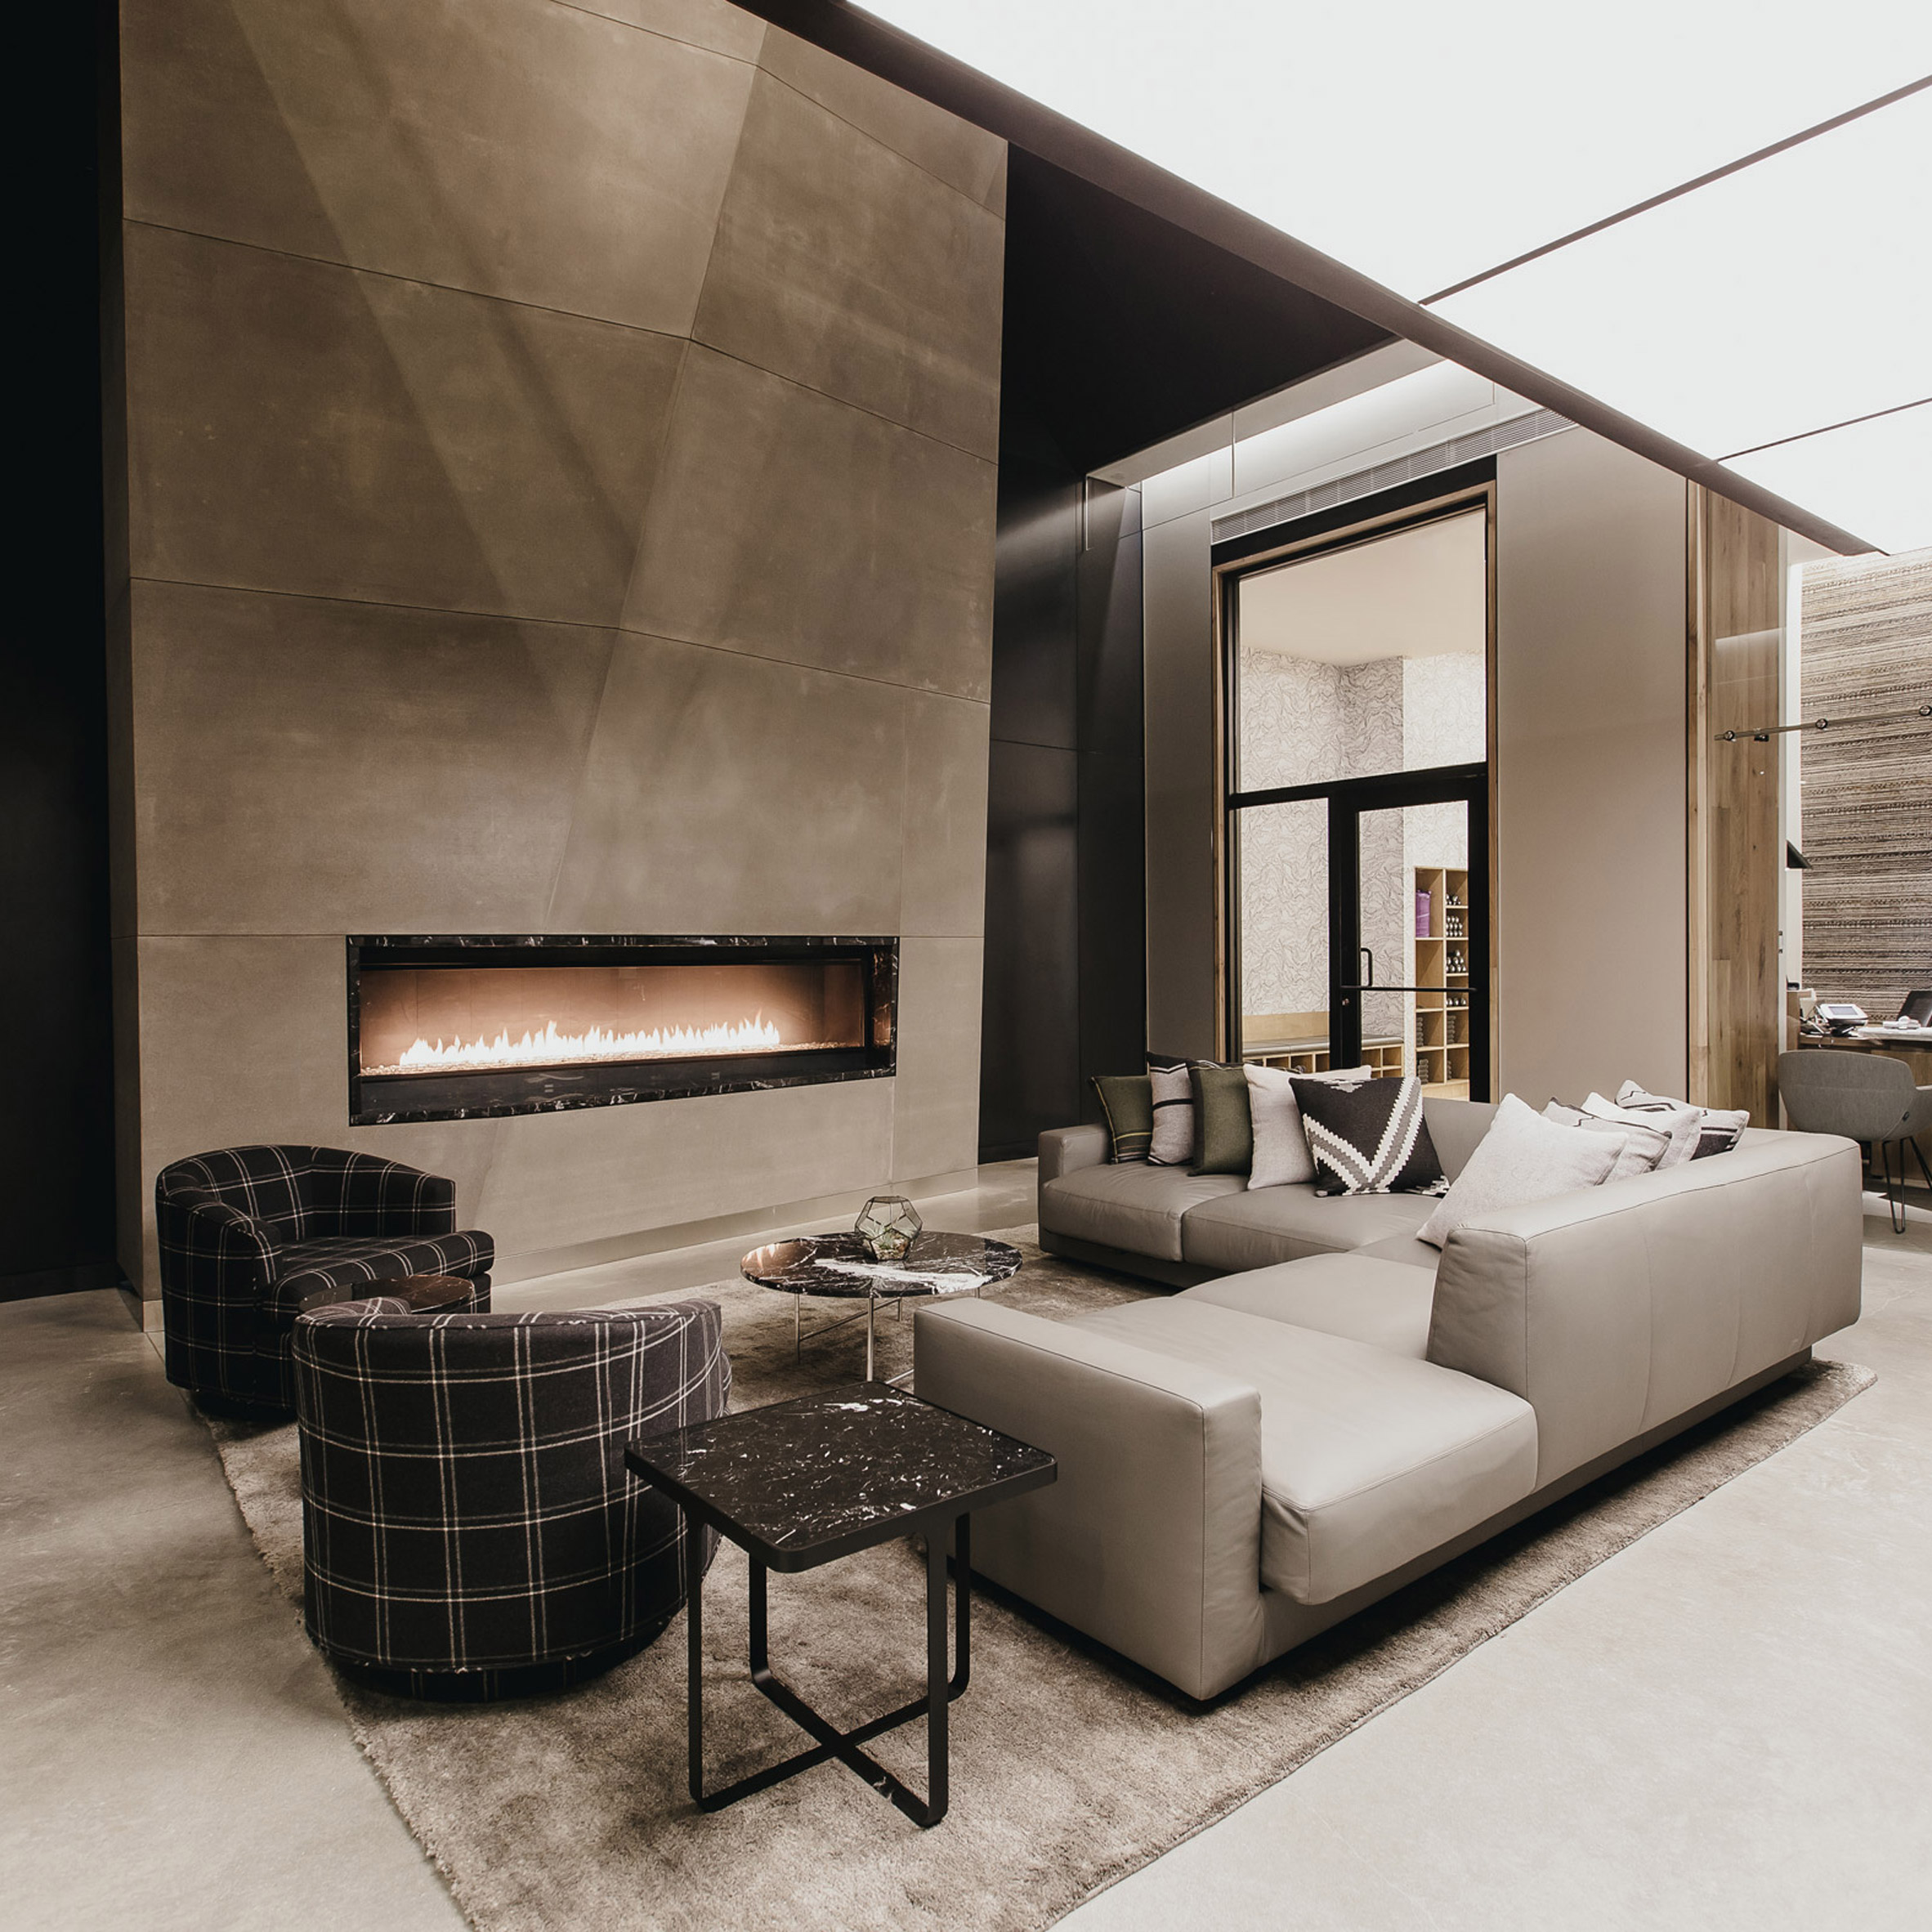 Montalba Architects Choses Earthy Materials For Equinox Vancouver